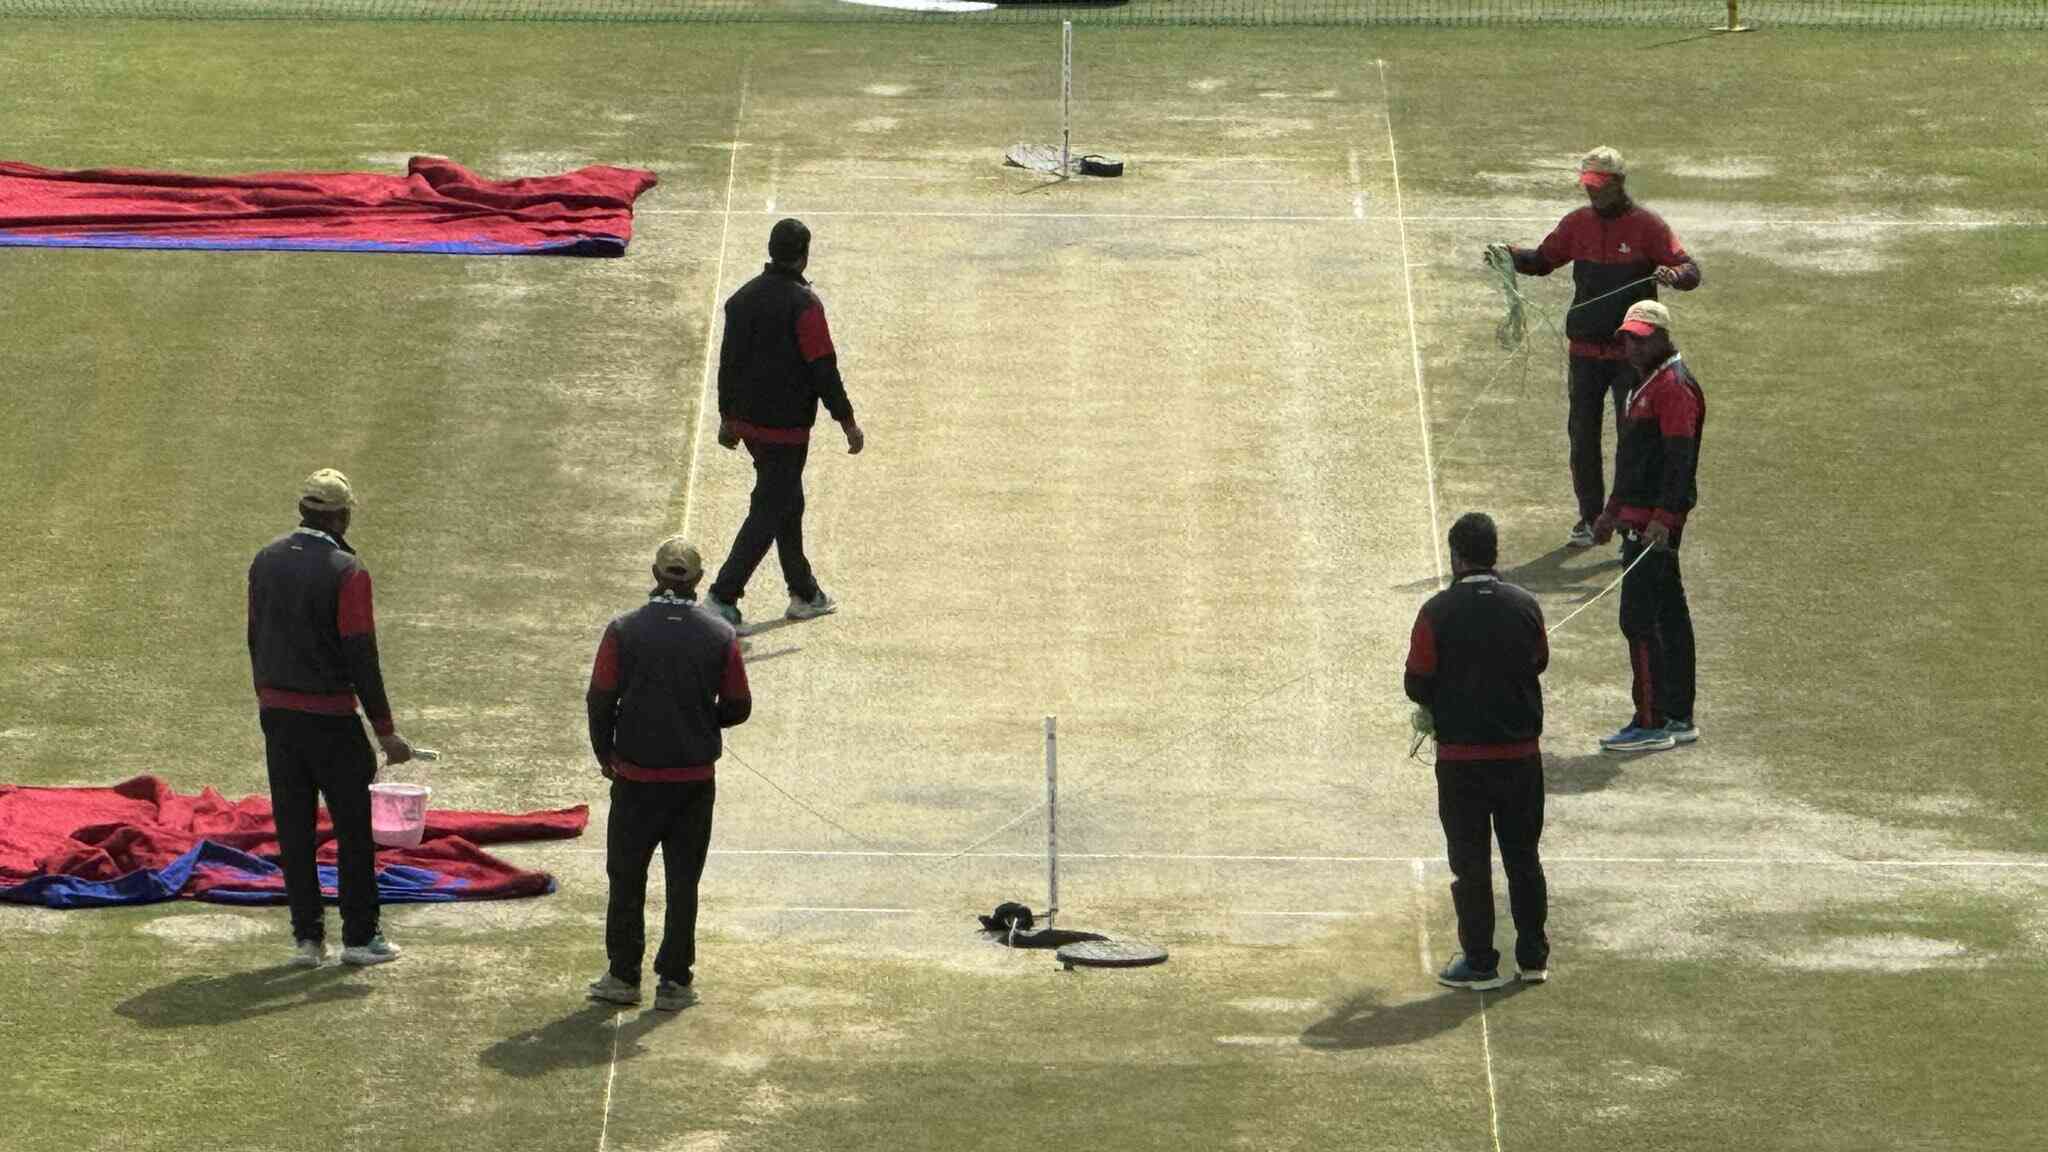 HPCA International Stadium Dharamsala Pitch Report For IND vs ENG 5th Test